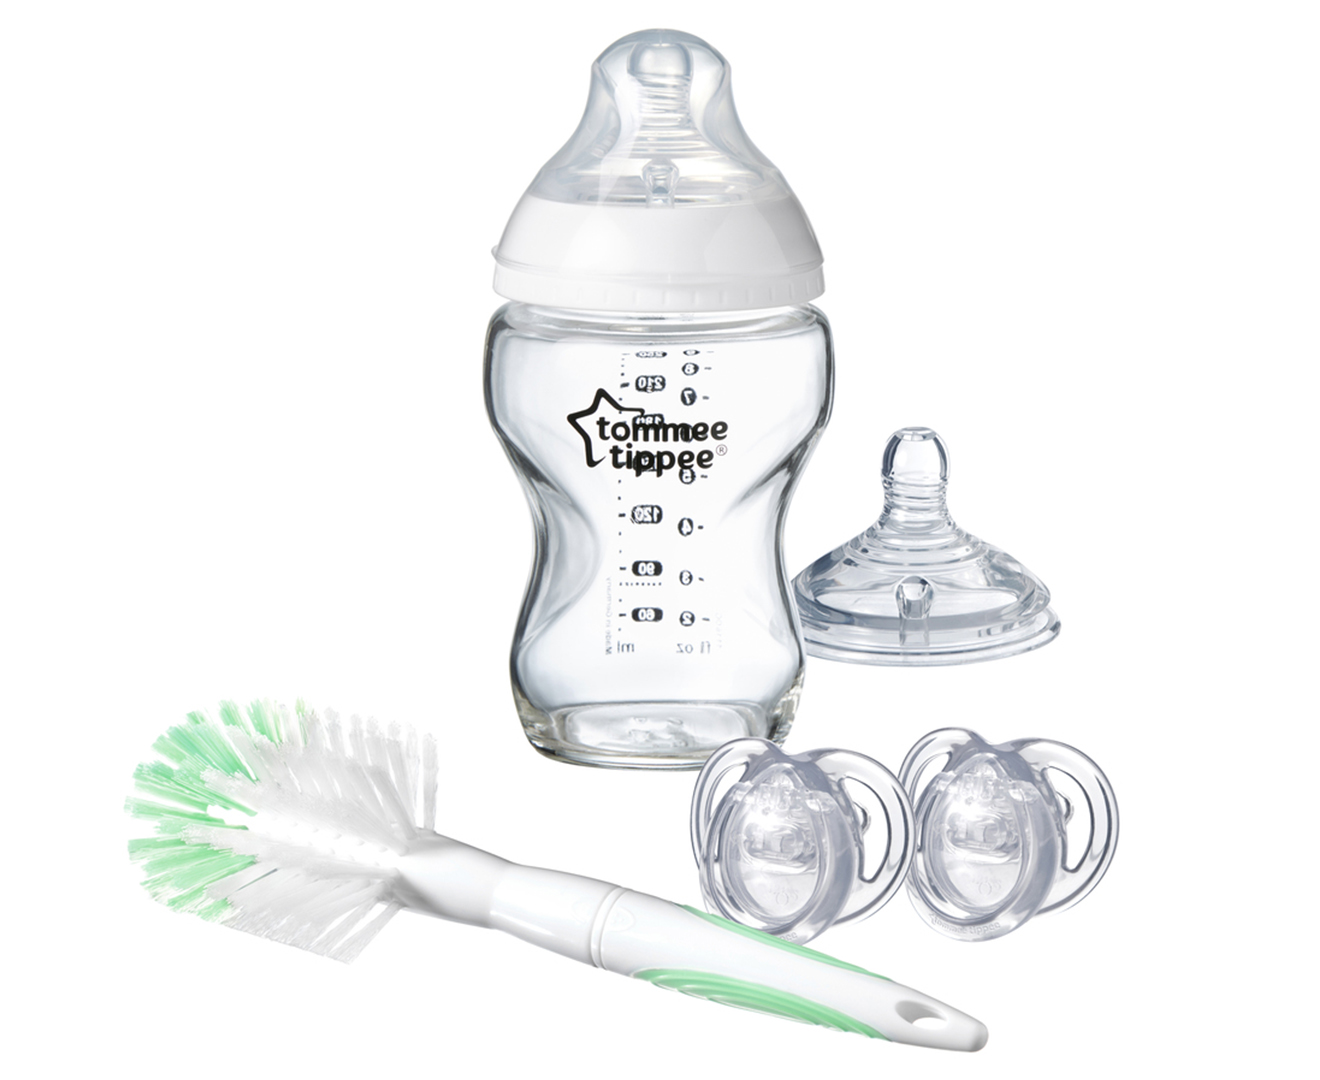 Tommee tippee glass bottles